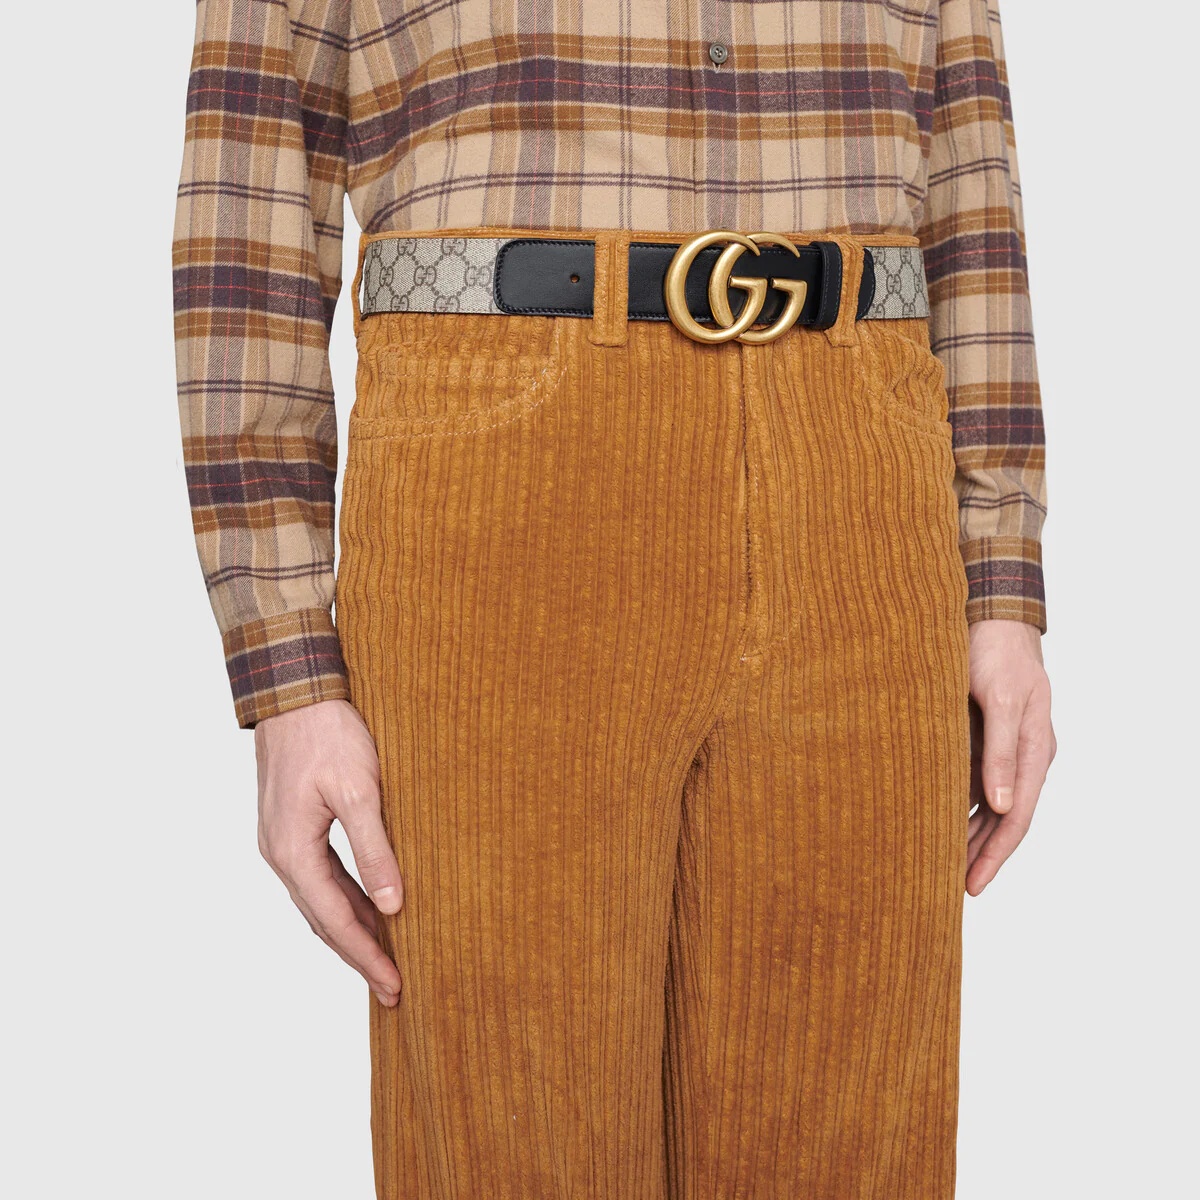 GG belt with Double G buckle - 4